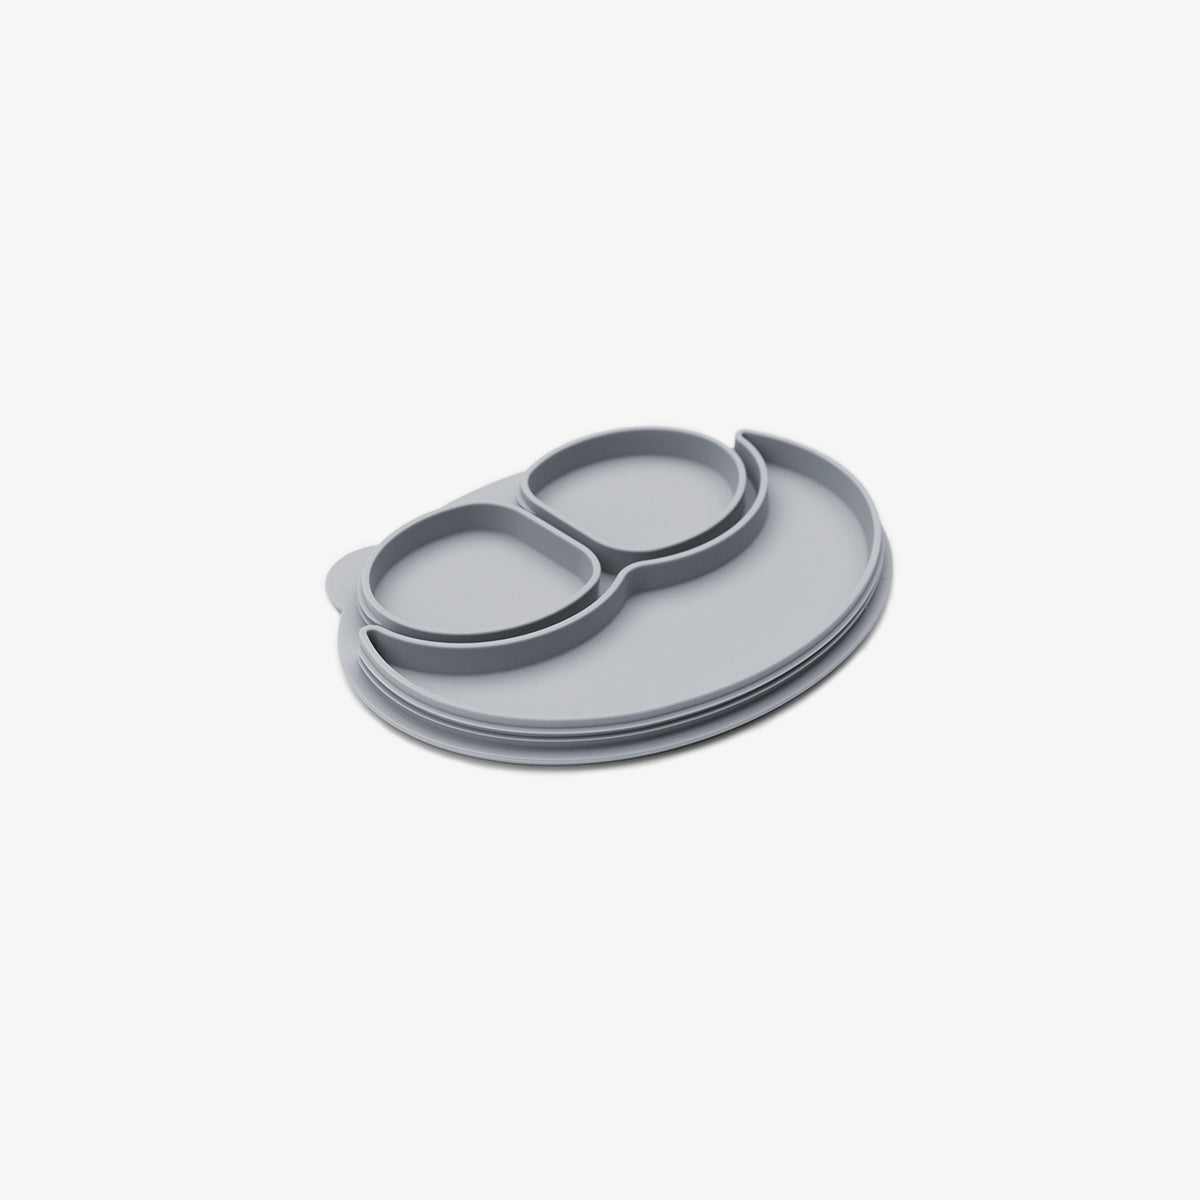 Mini Mat Lid in Pewter / Storage Lids for the Mini Mat by ezpz / Silicone Lid for Toddler Plate